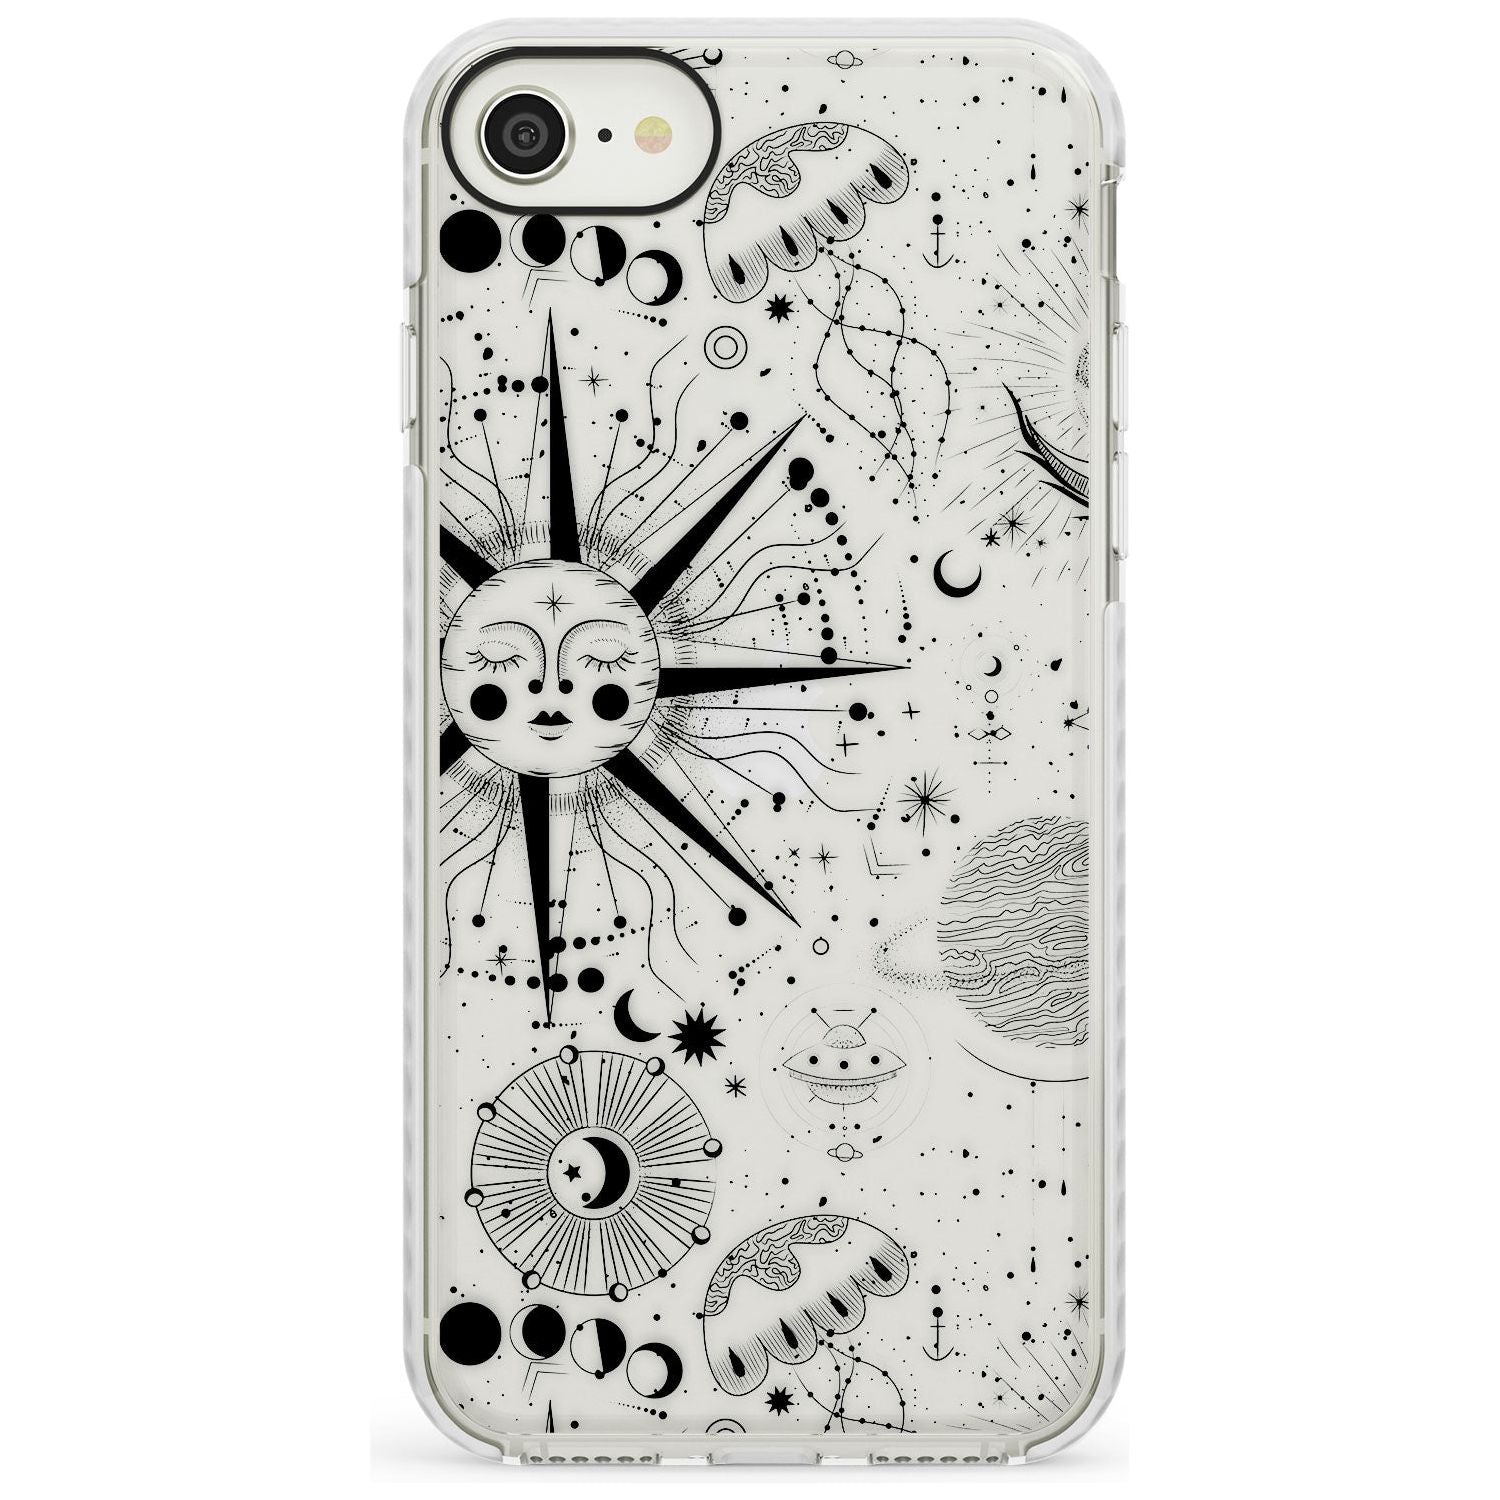 Large Sun Vintage Astrological Impact Phone Case for iPhone SE 8 7 Plus